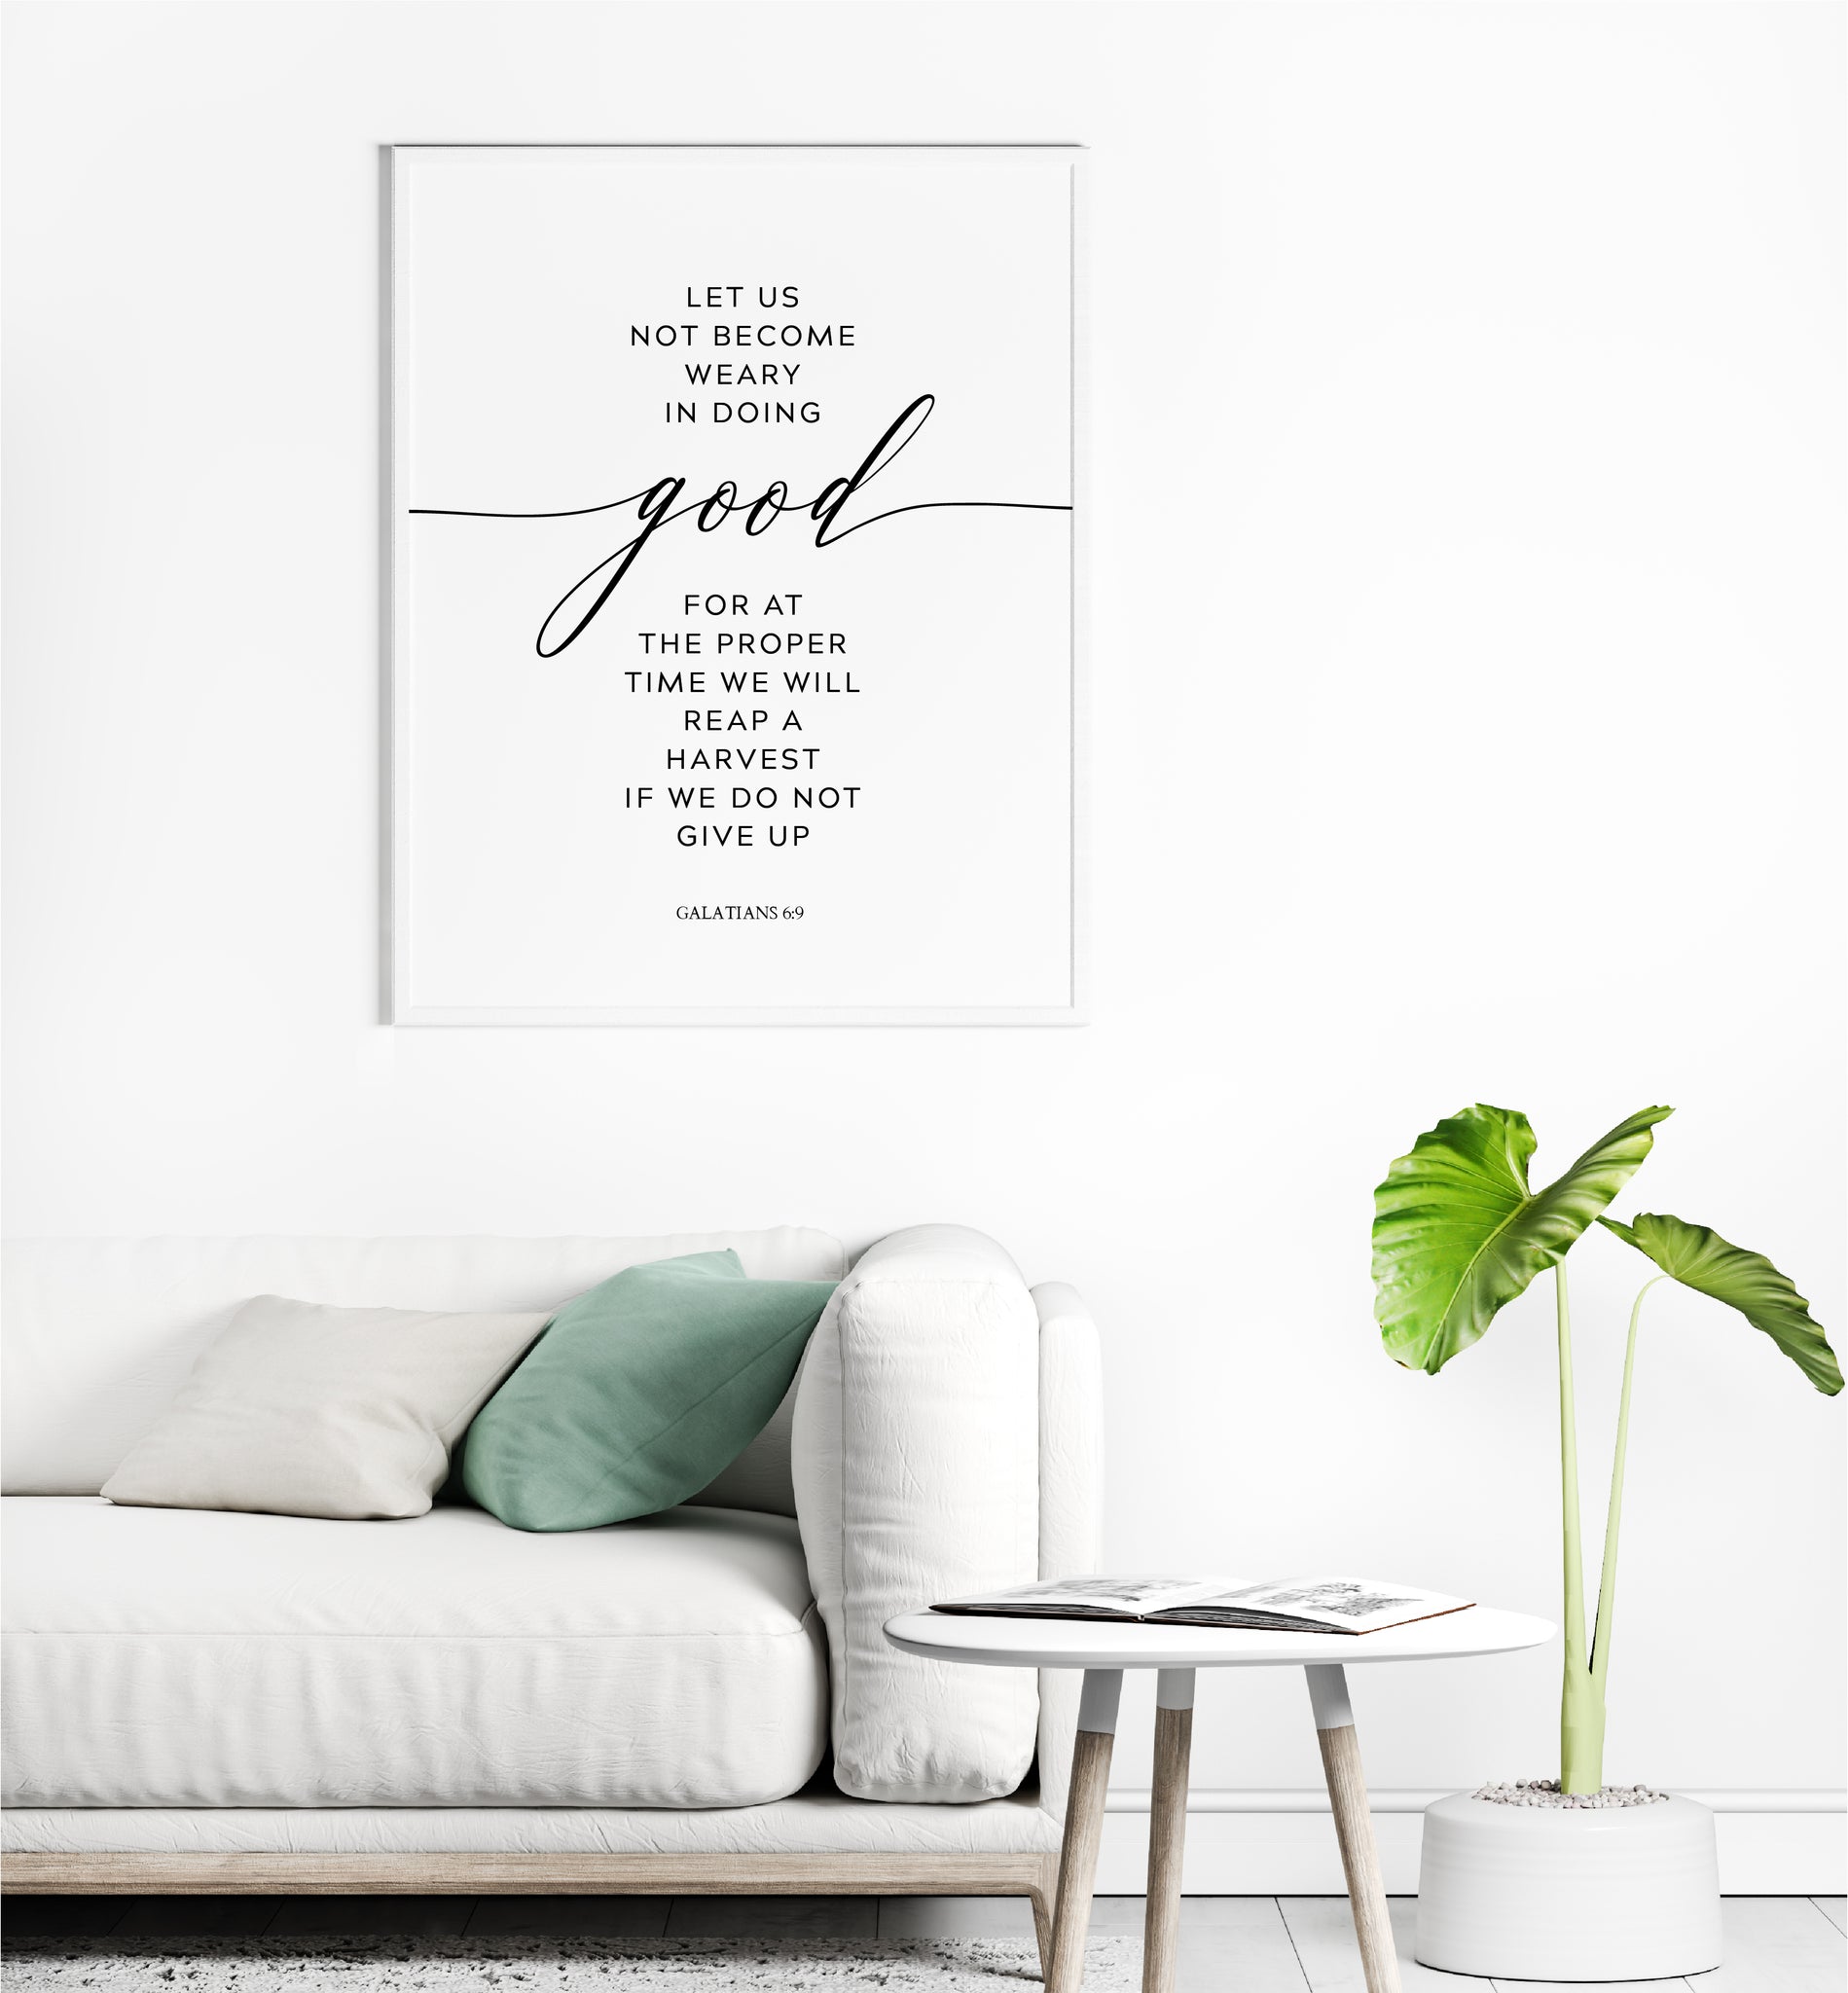 Art Print for Galatians 6:9 by Dwell on Sunday School Zone